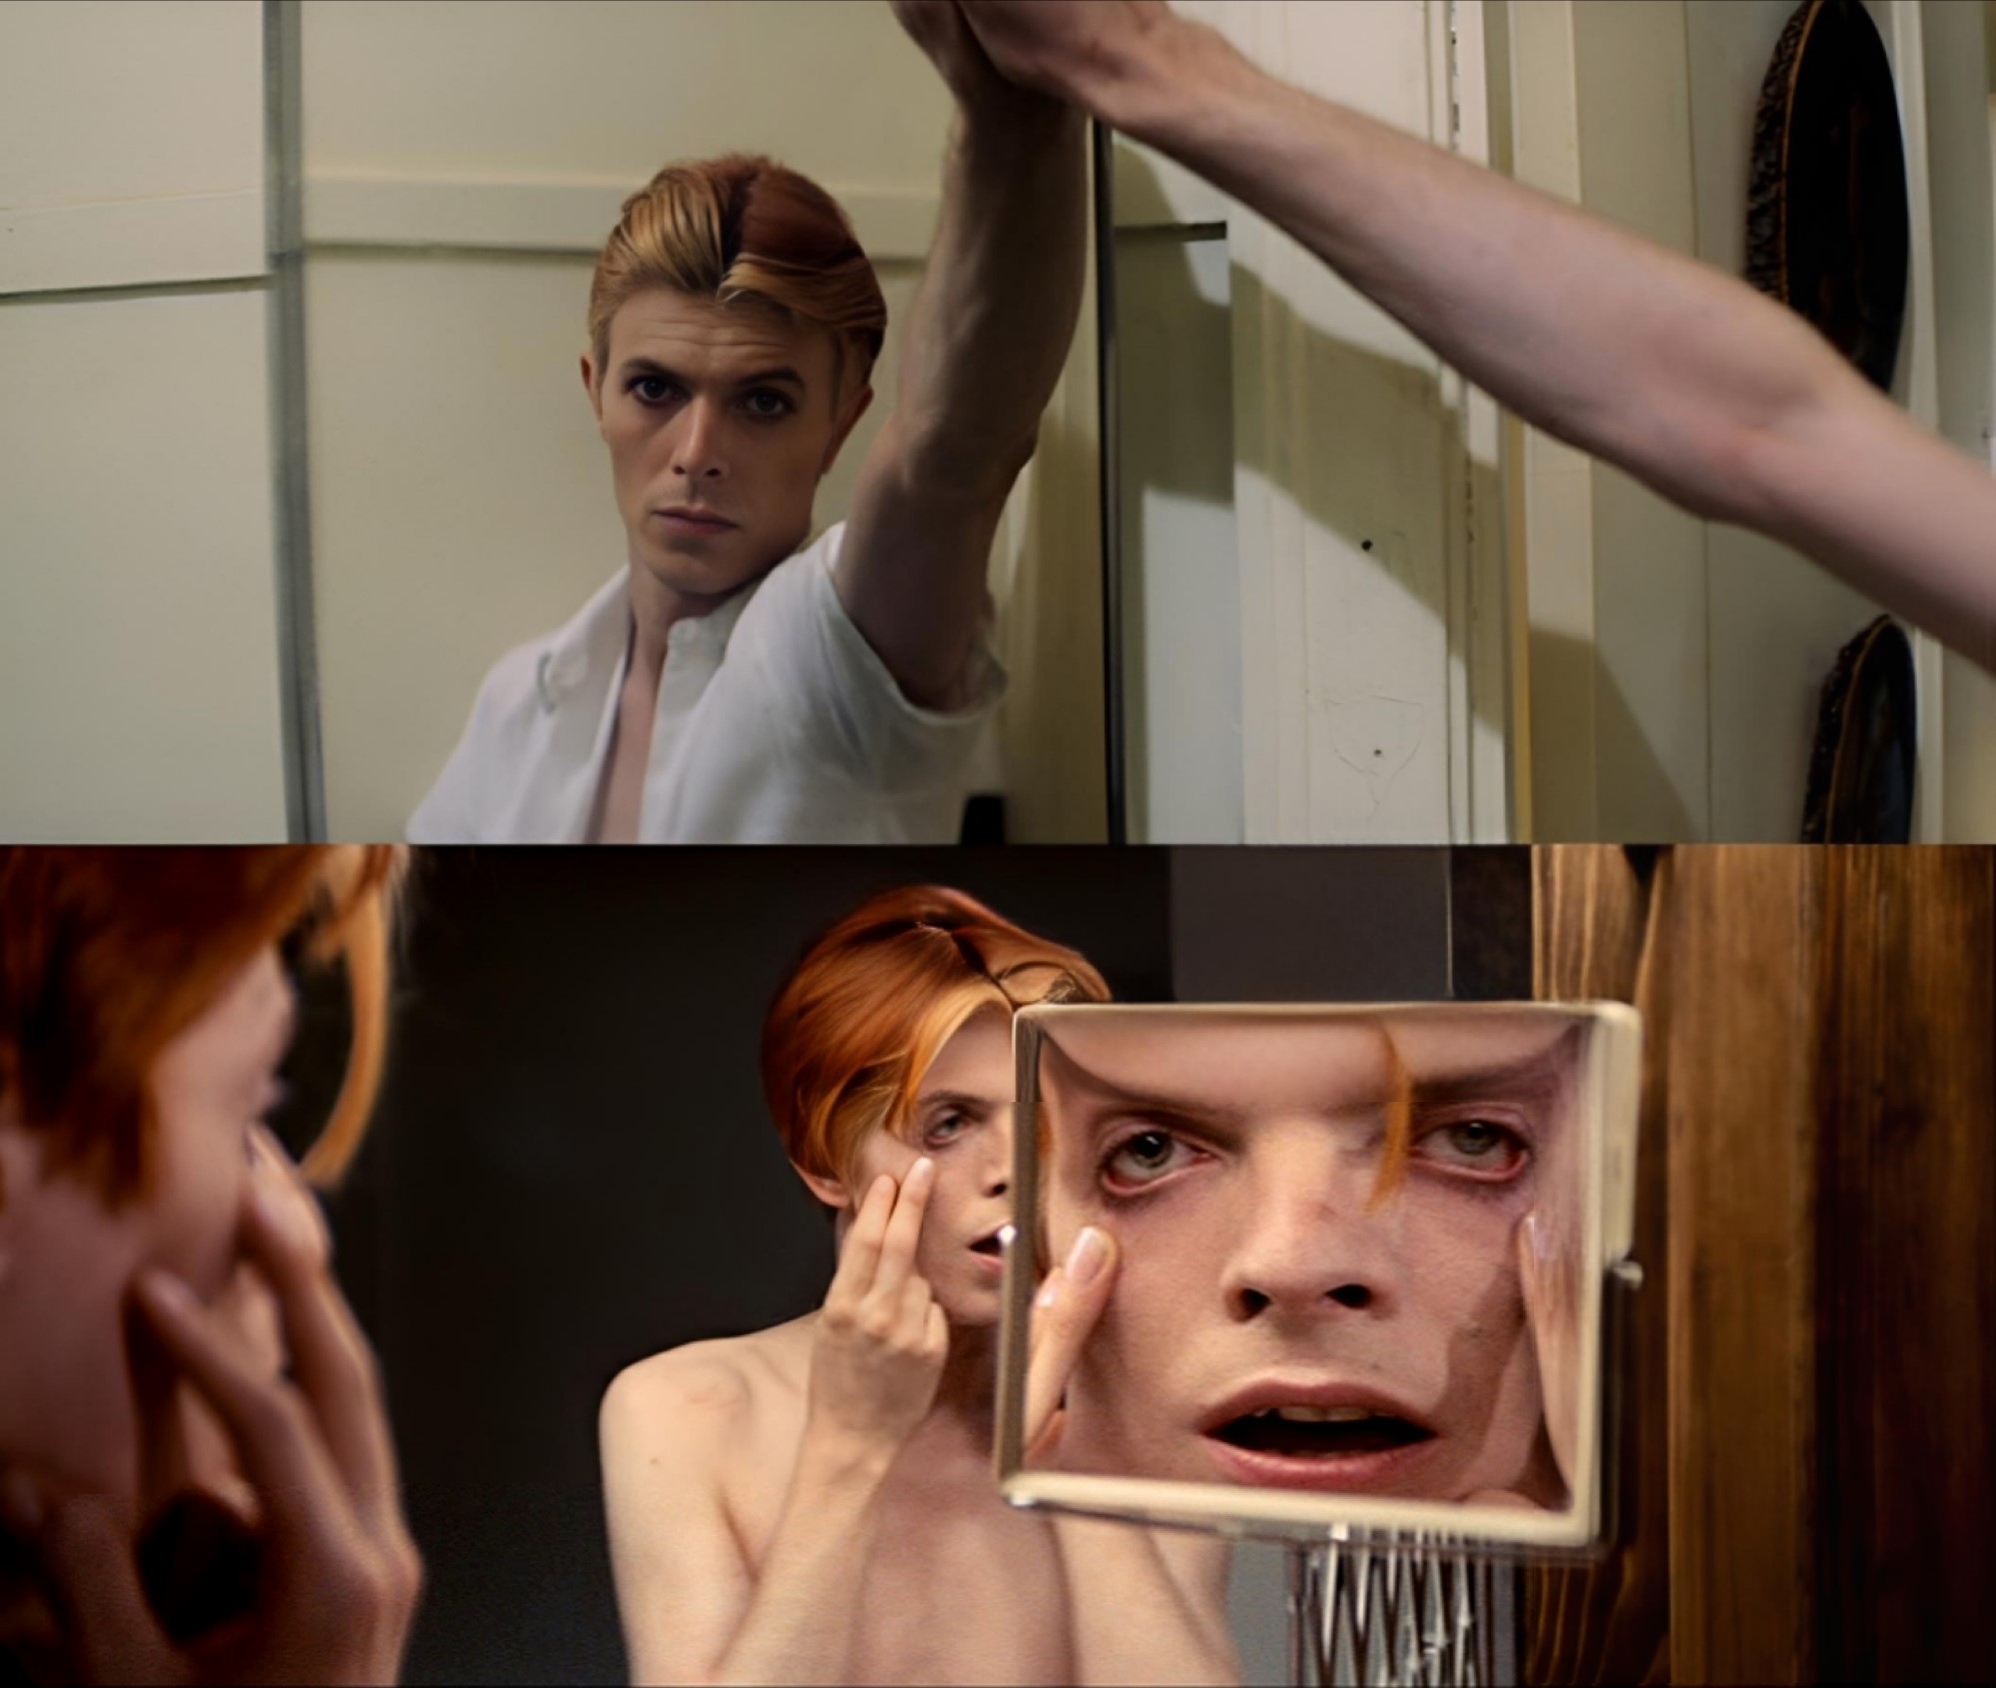 David Bowie Nicolas Roeg The Man Who Fell To Earth Walter Tevis 1975